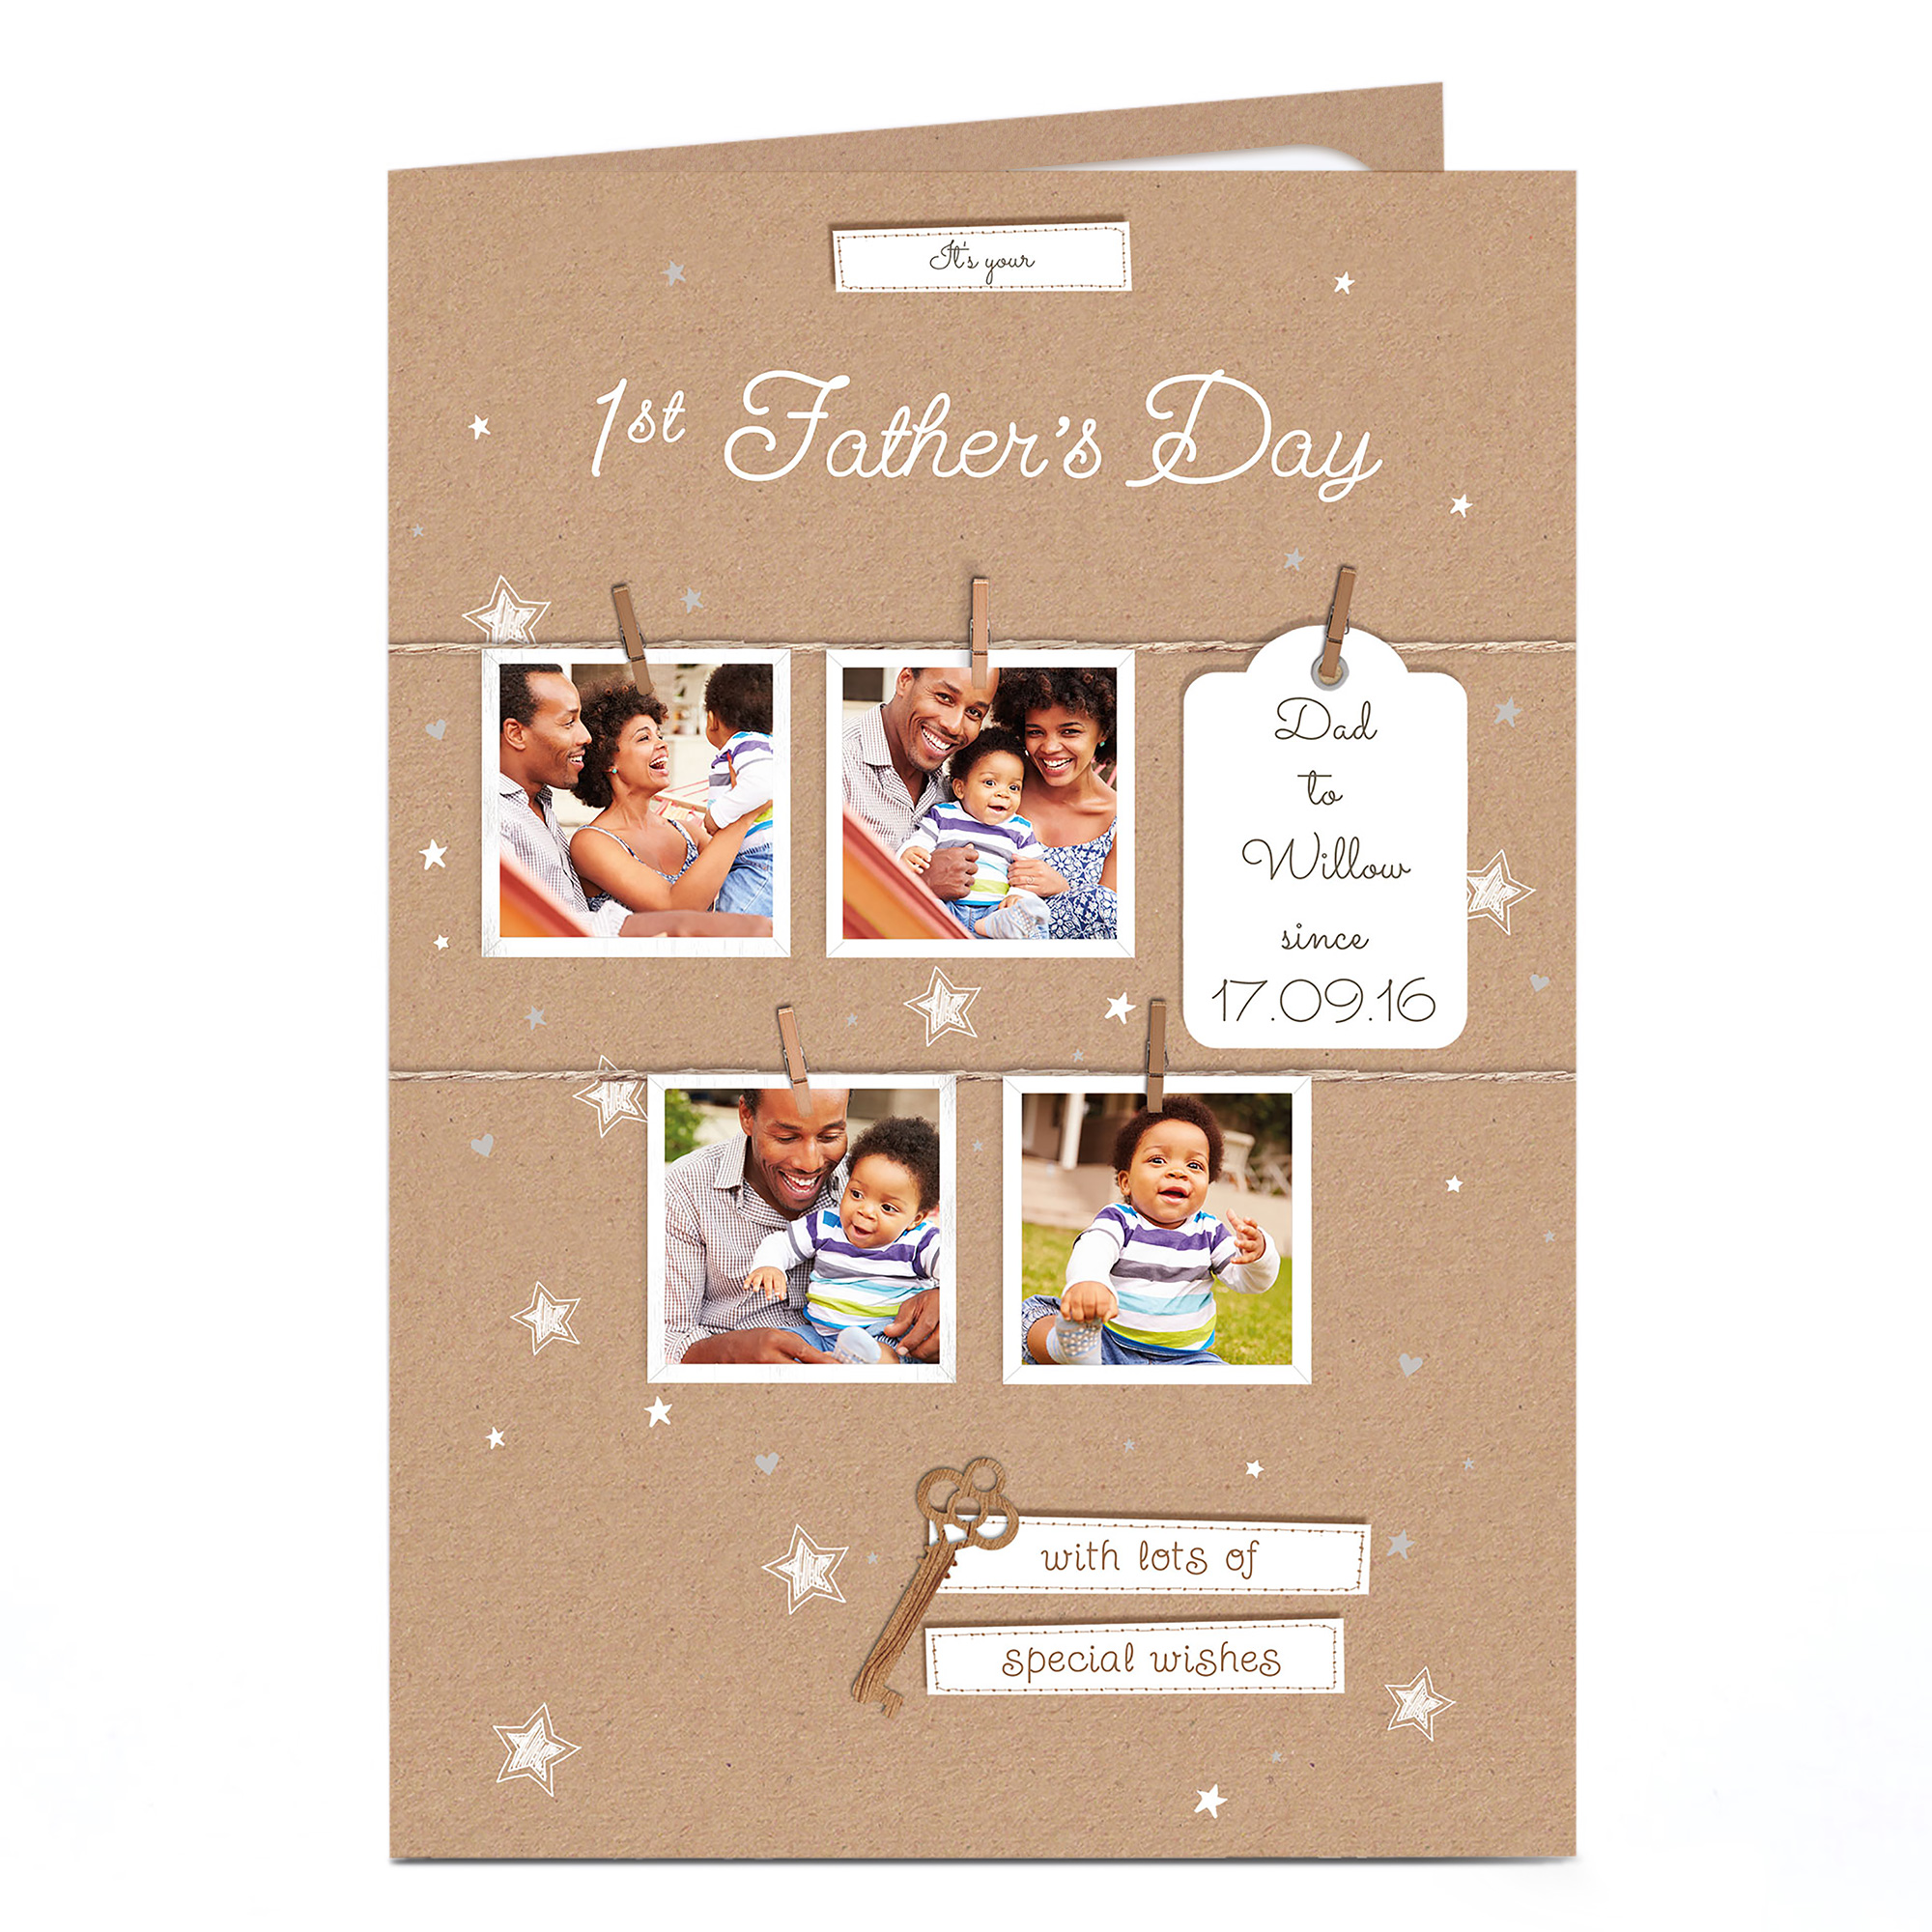 Photo Father's Day Card - 1st Father's Day